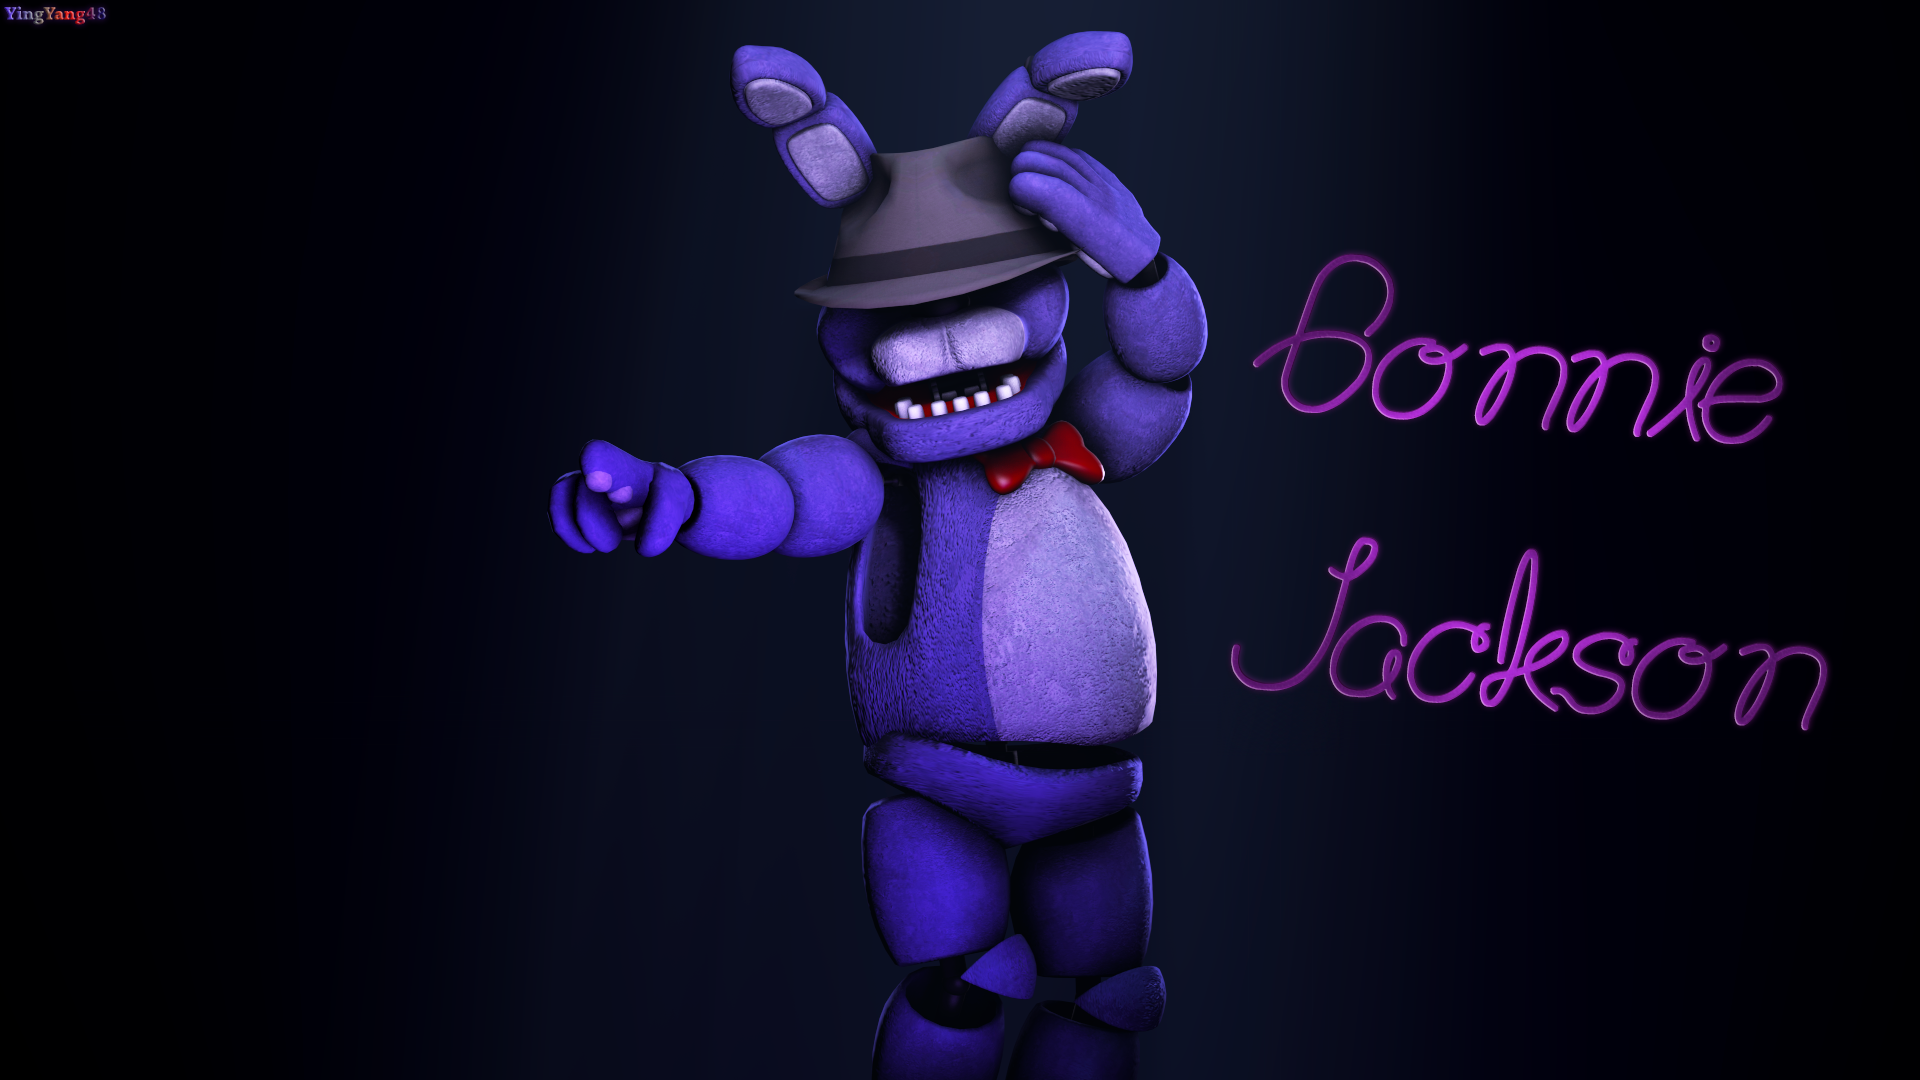 Five nights at freddys hd papers and backgrounds